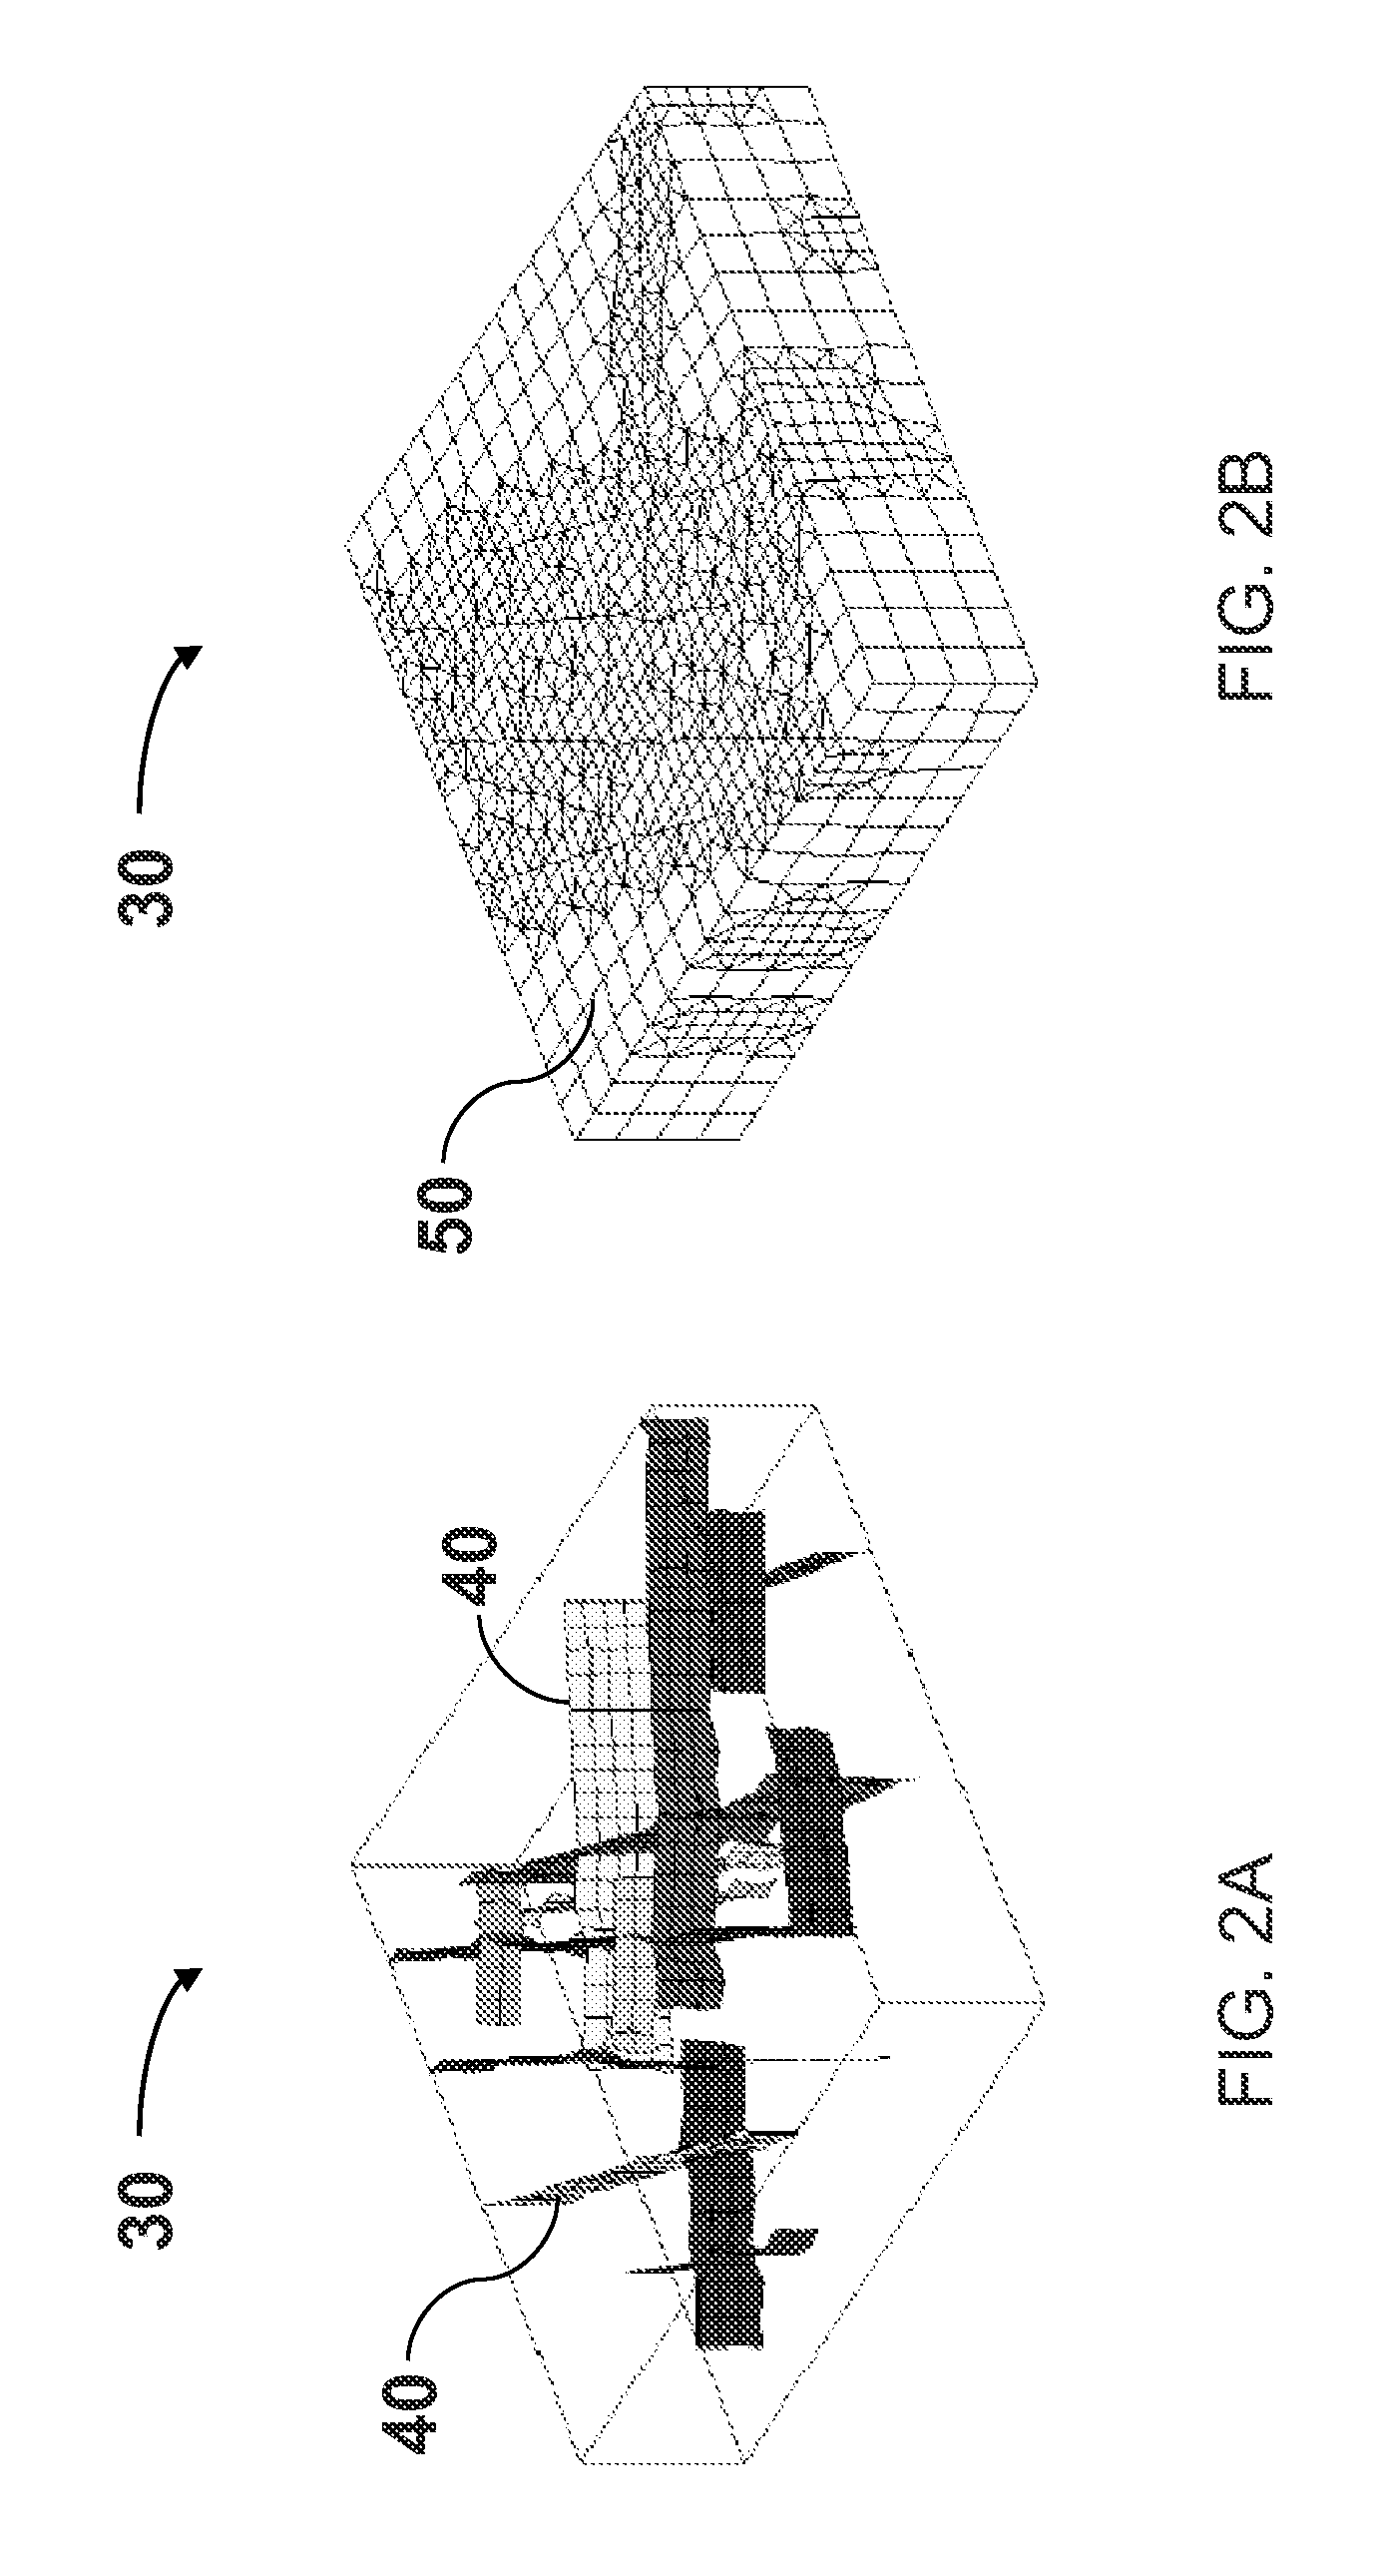 System and method for predicting fluid flow characteristics within fractured subsurface reservoirs